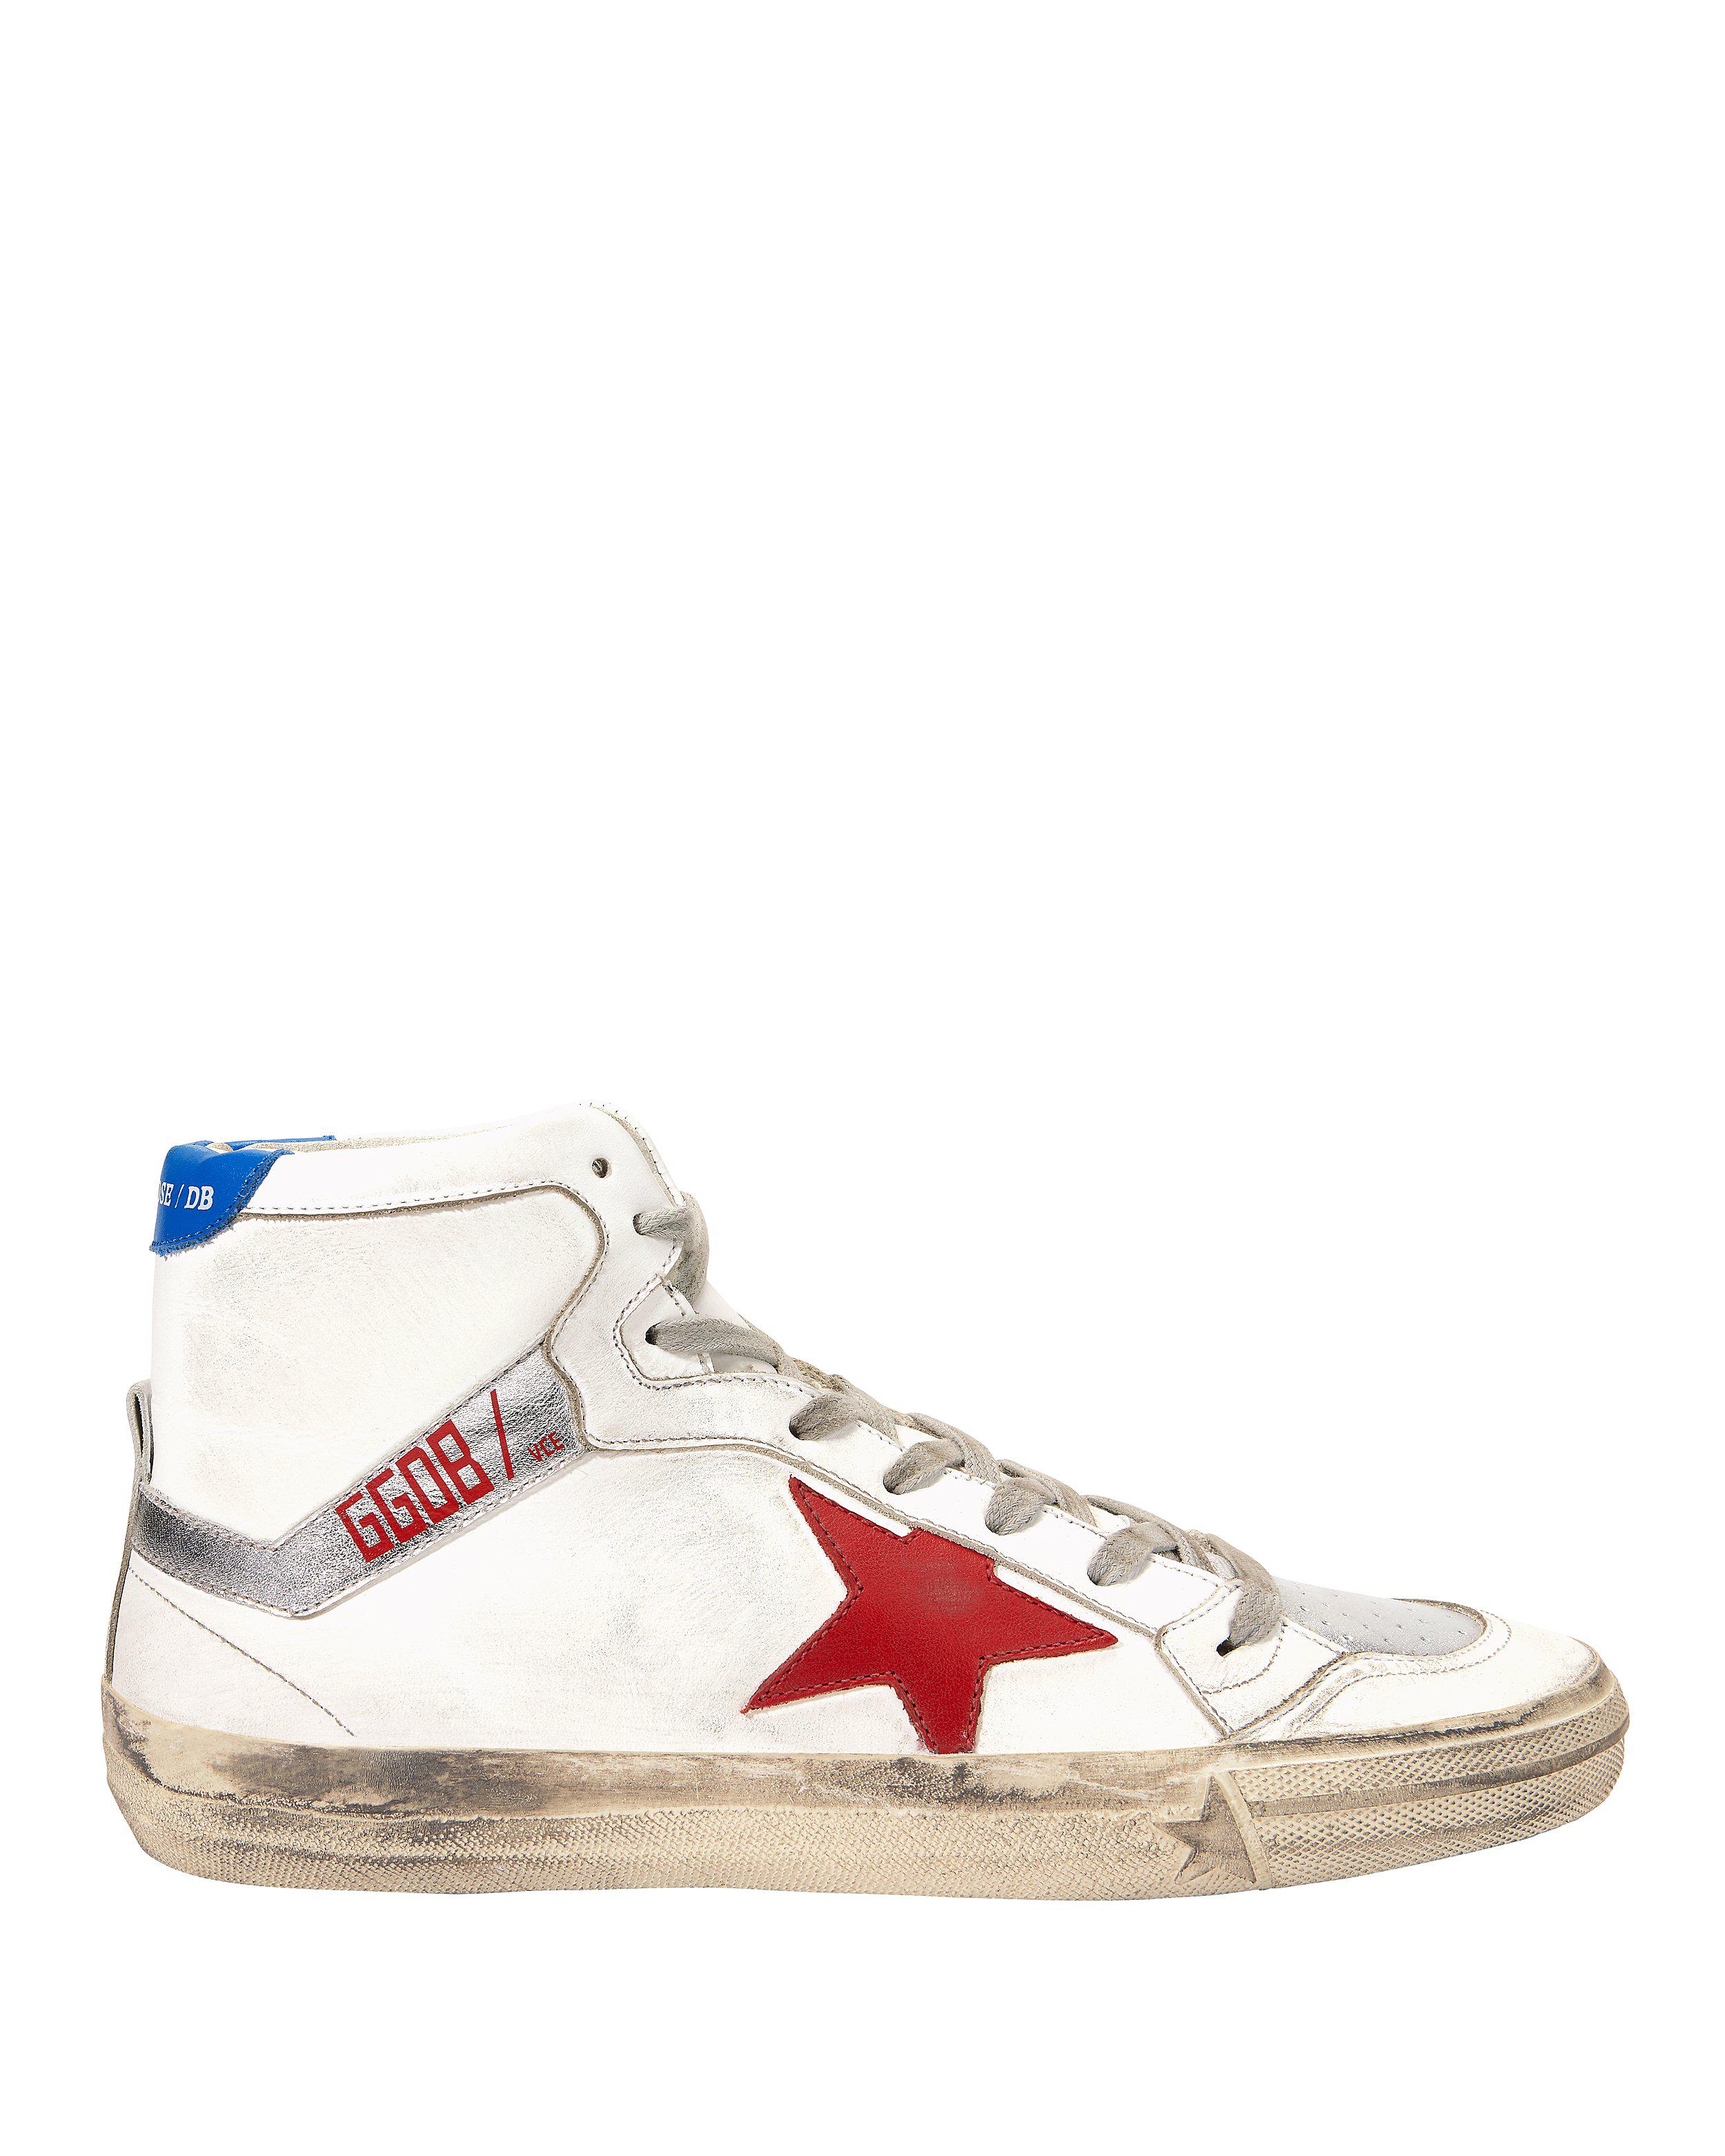 Golden Goose 2.12 High-top Red Star Leather Sneakers in White | Lyst